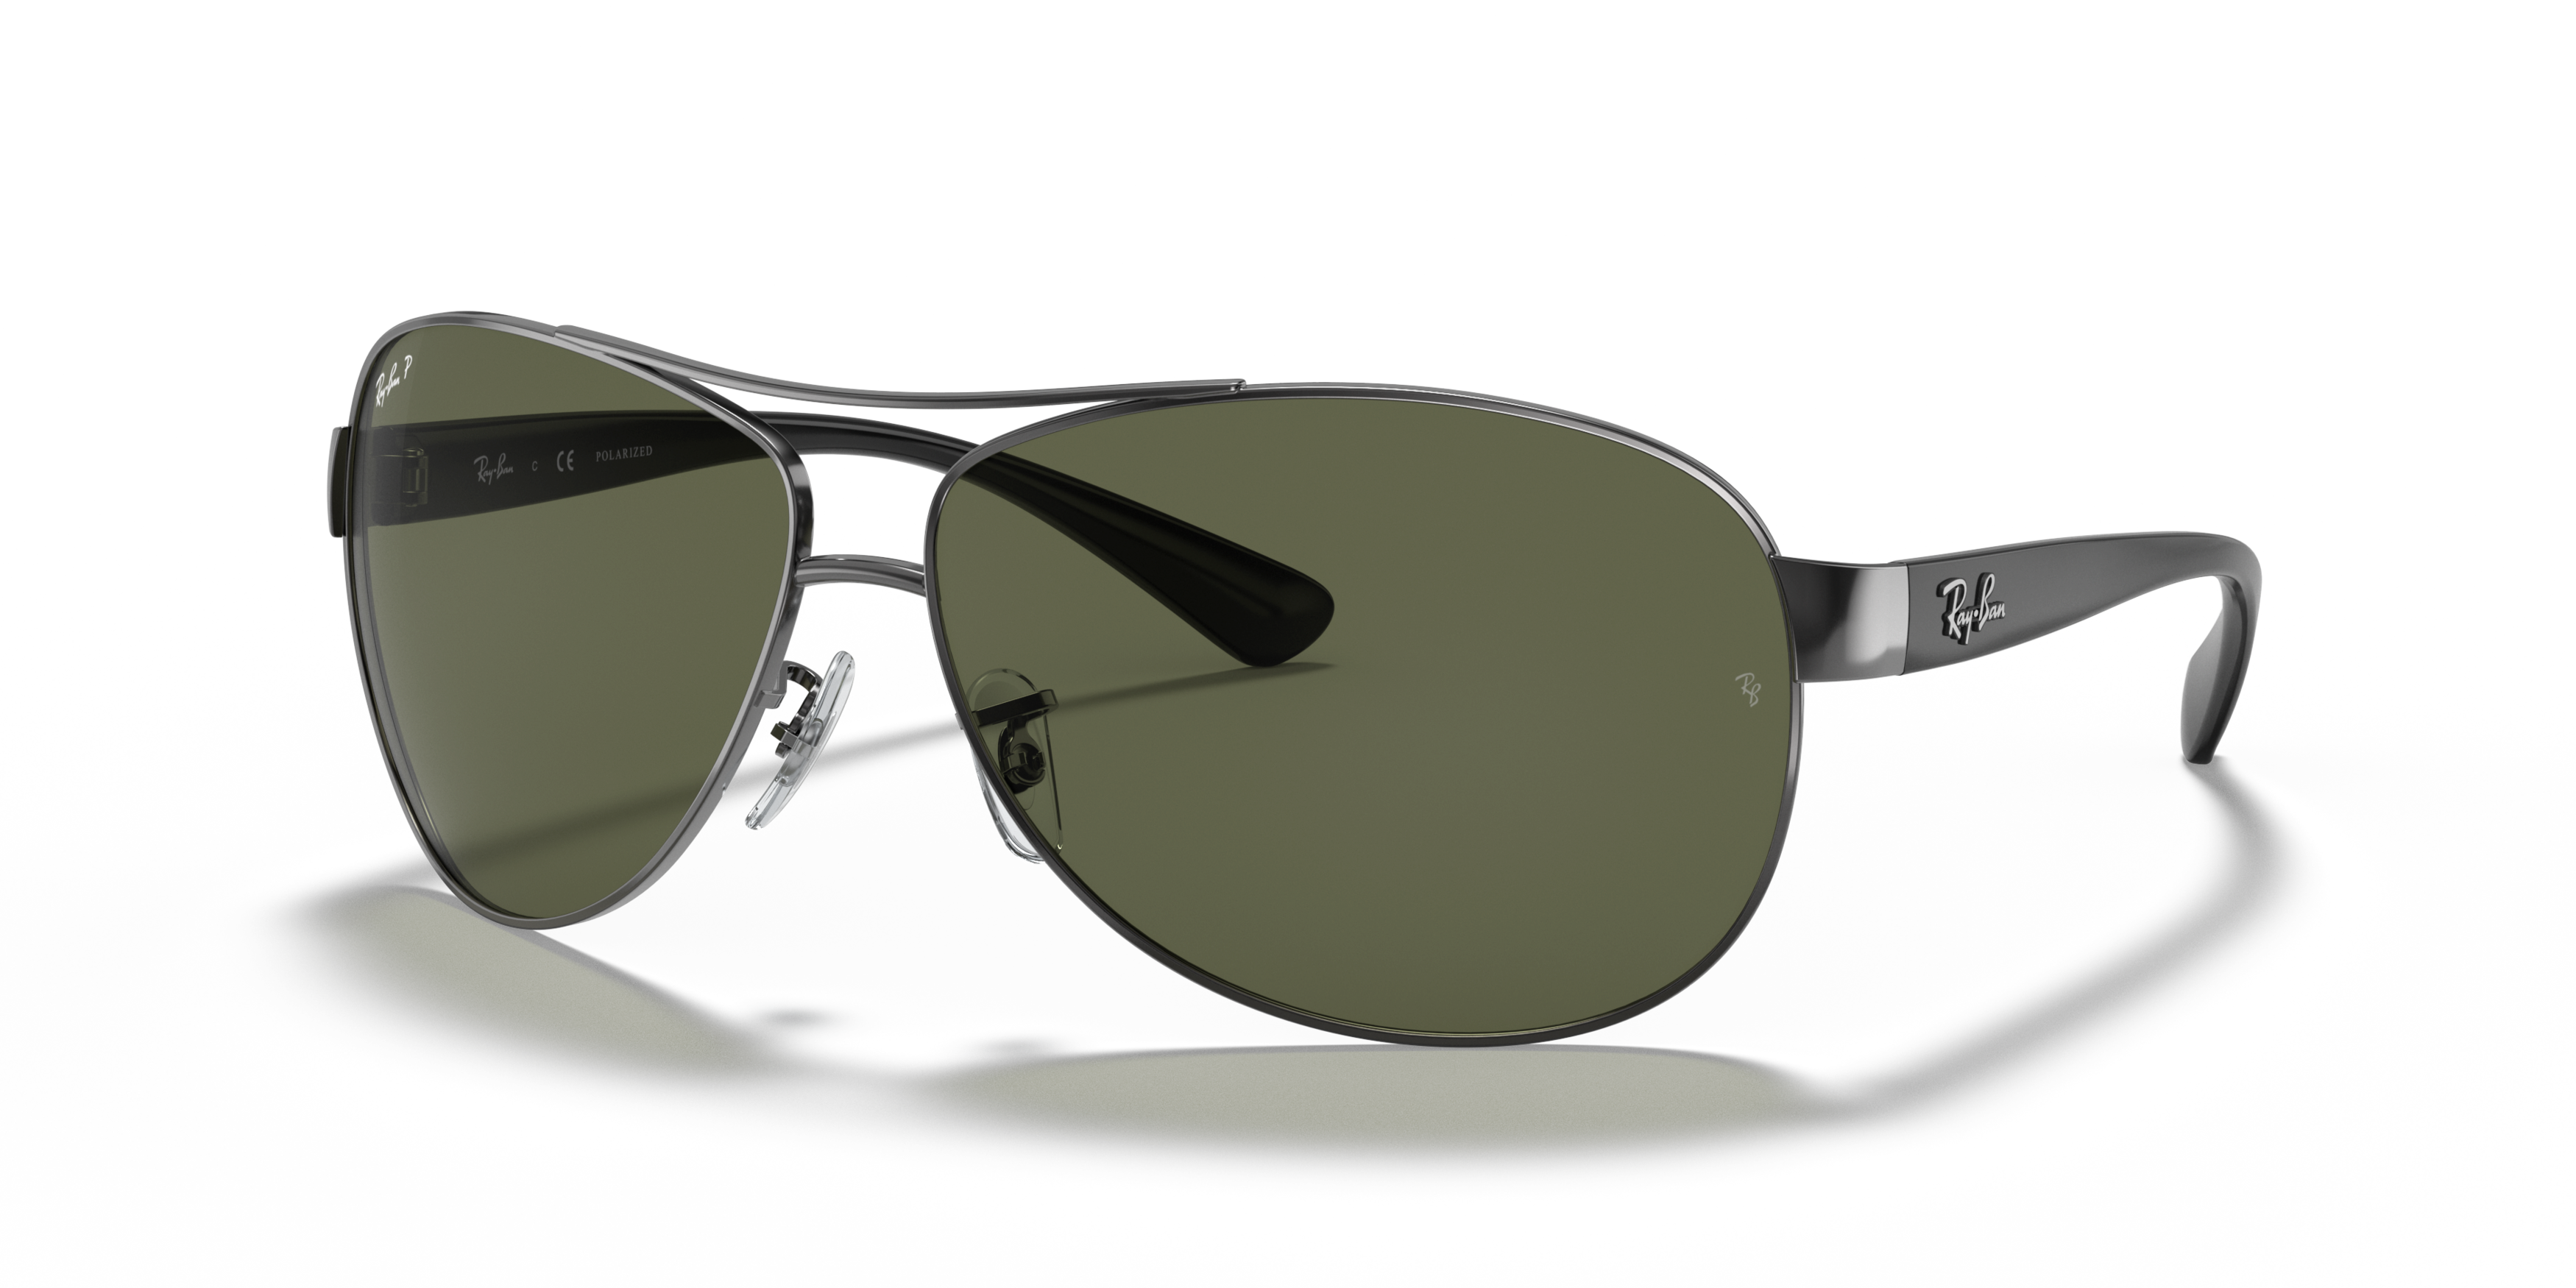 Angle_Left01 Ray-Ban 0RB3386 004/9A Verde / Gris